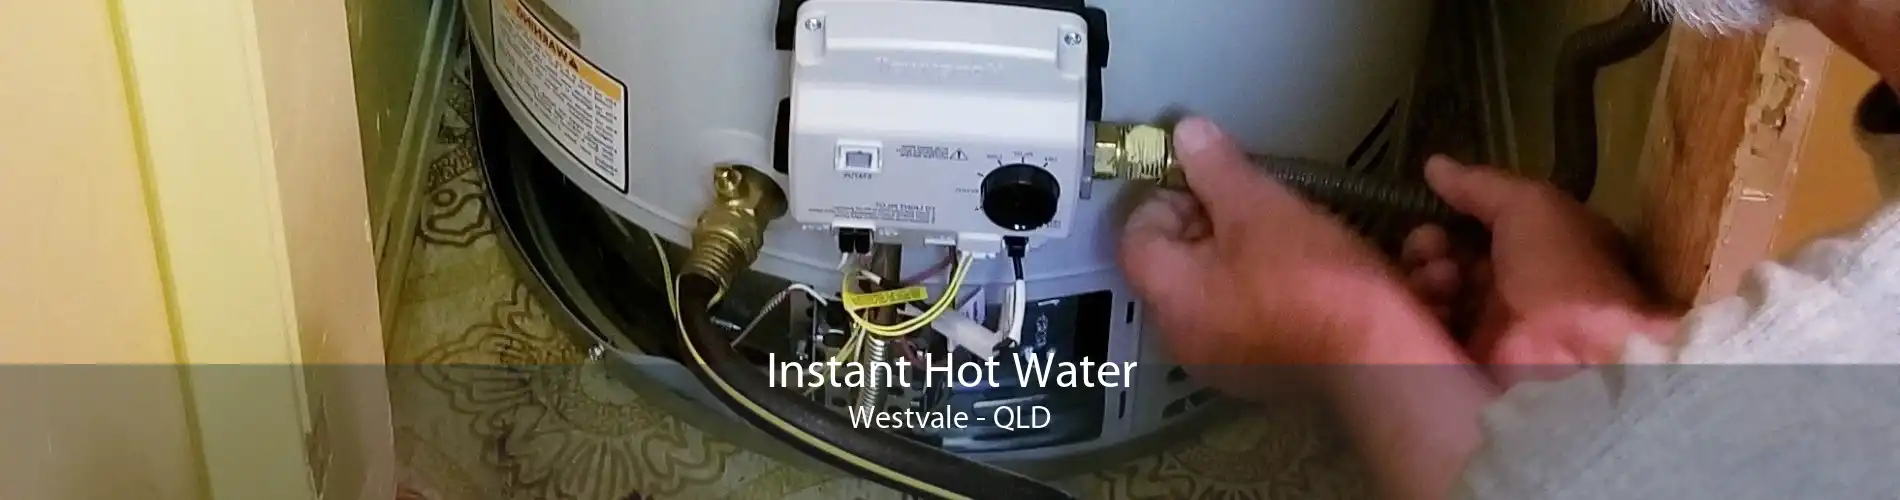 Instant Hot Water Westvale - QLD